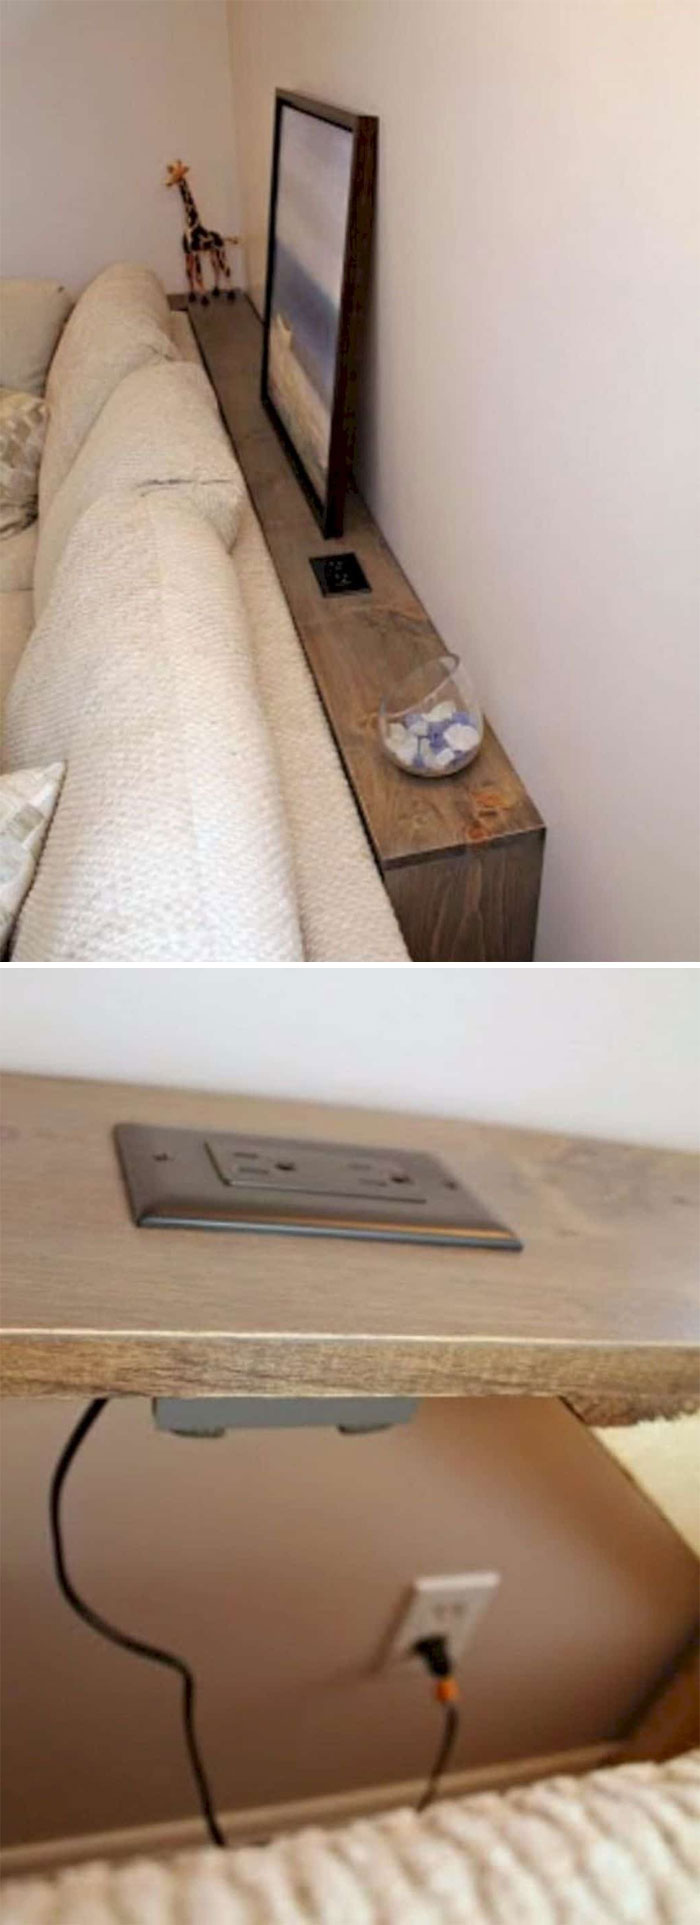 Place This Underneath Your Sofa For Extra Place Where To Put Your Stuff